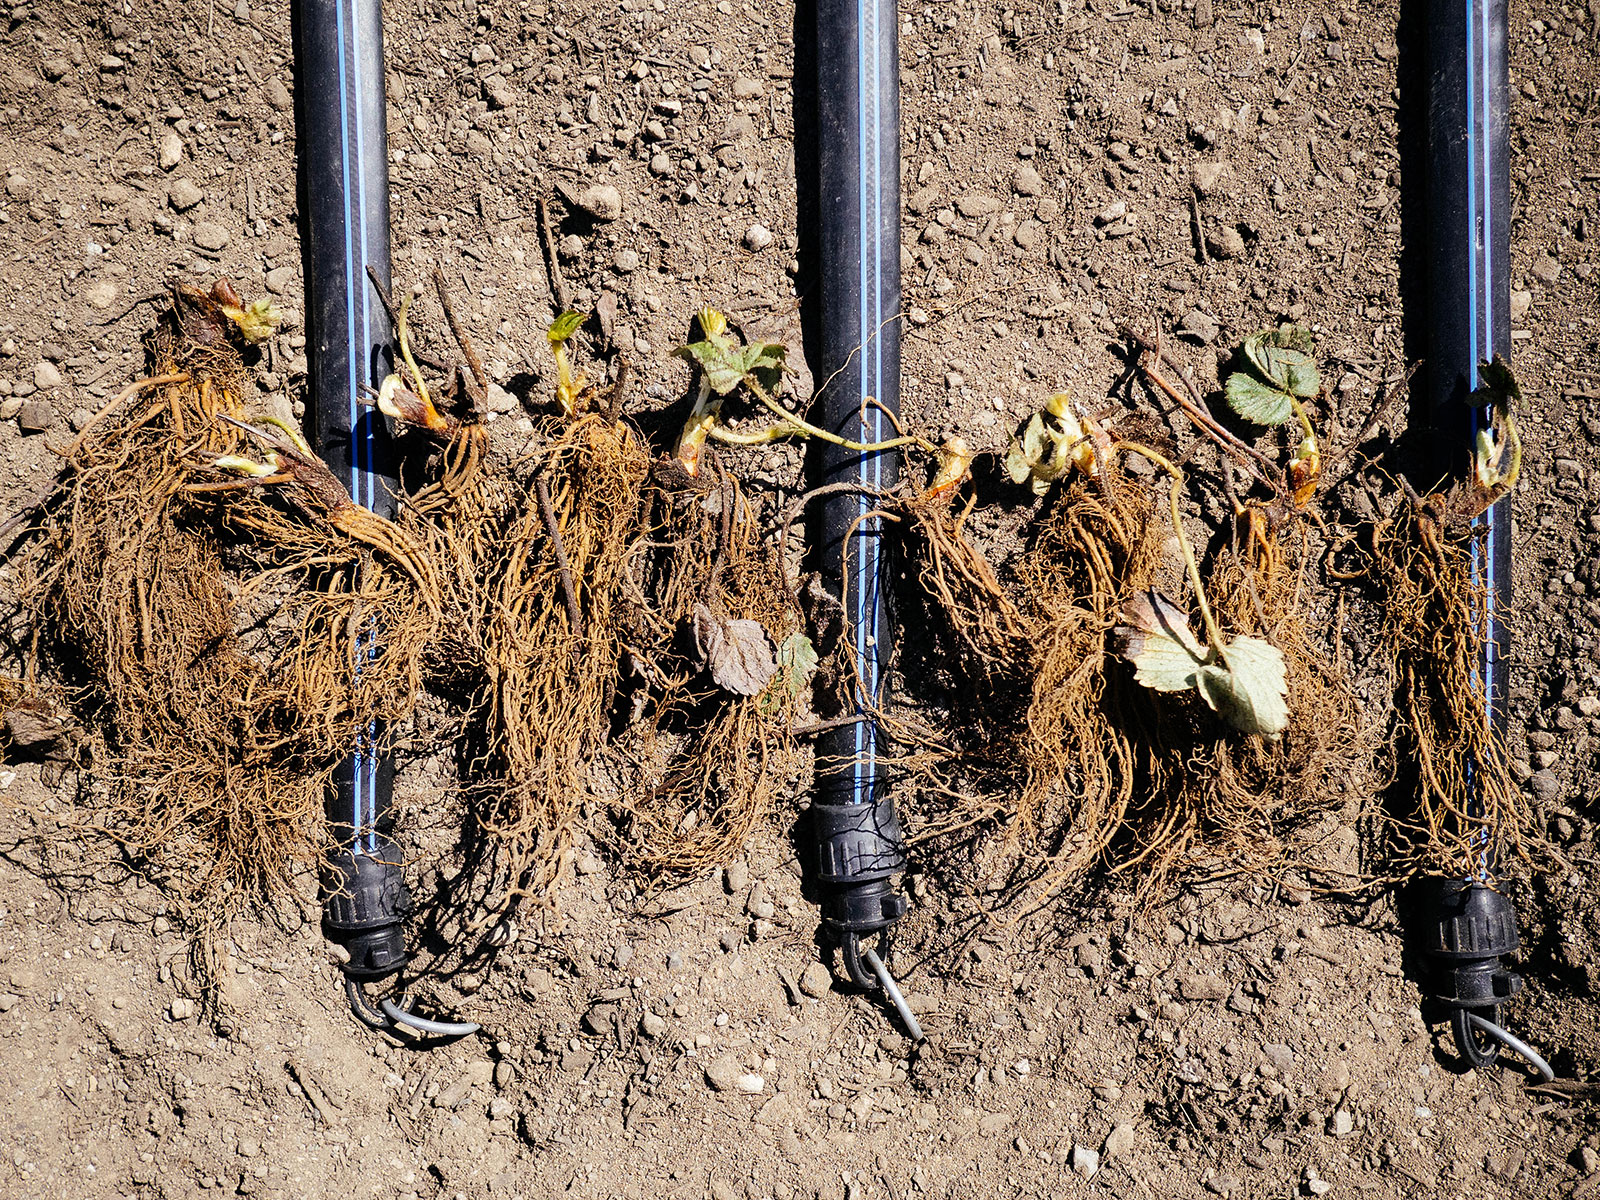 Bare-root strawberry plants laid out on the soil in between drip tape